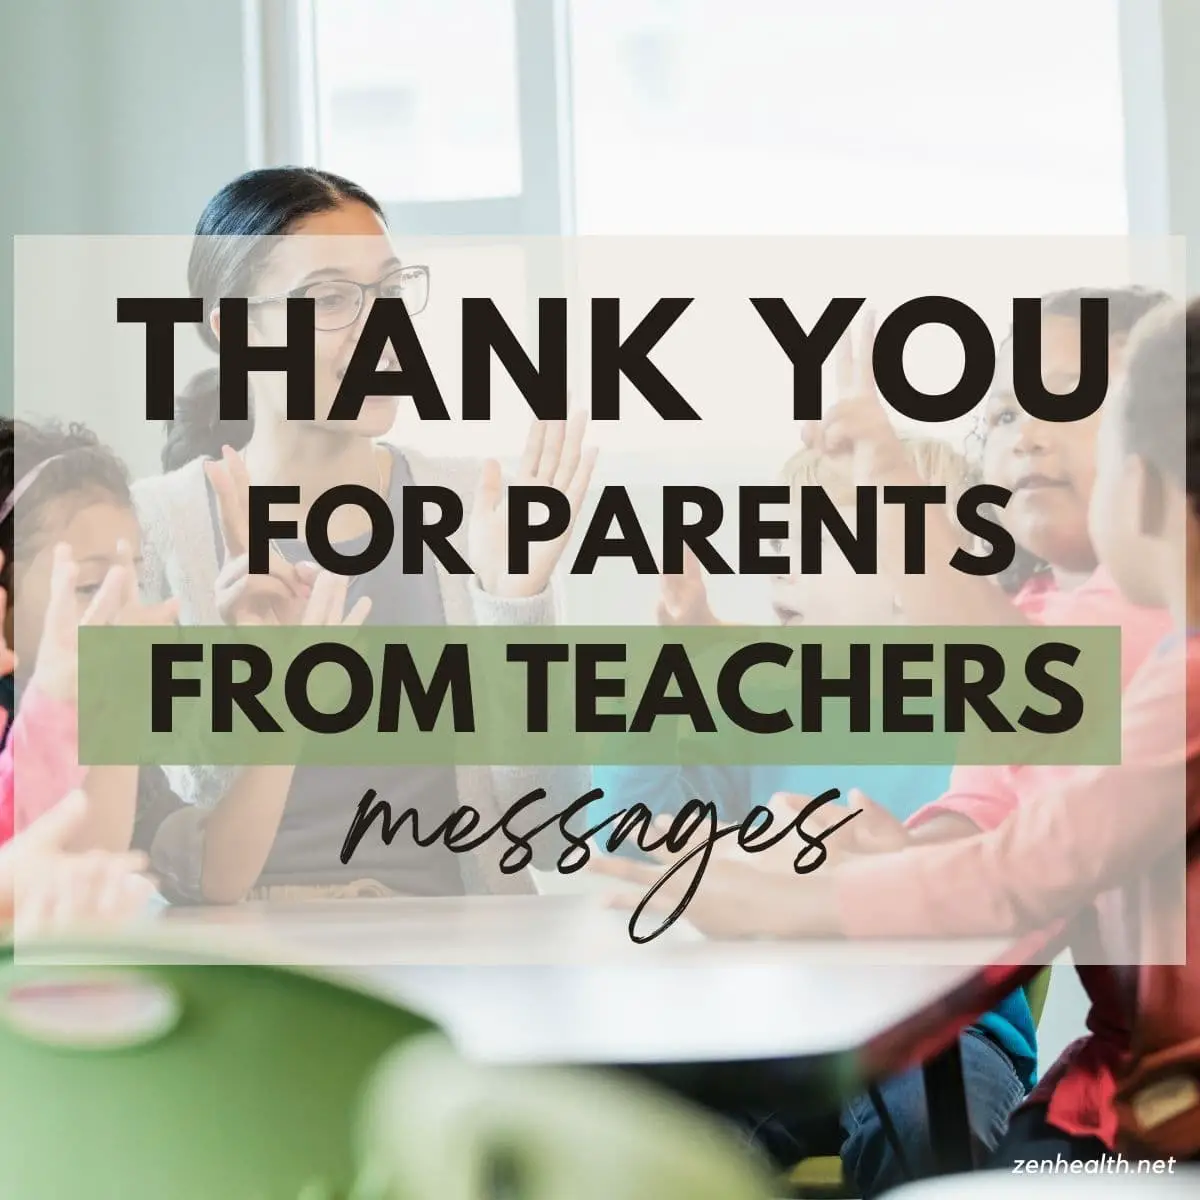 25 Thank You Messages for Parents from Teachers